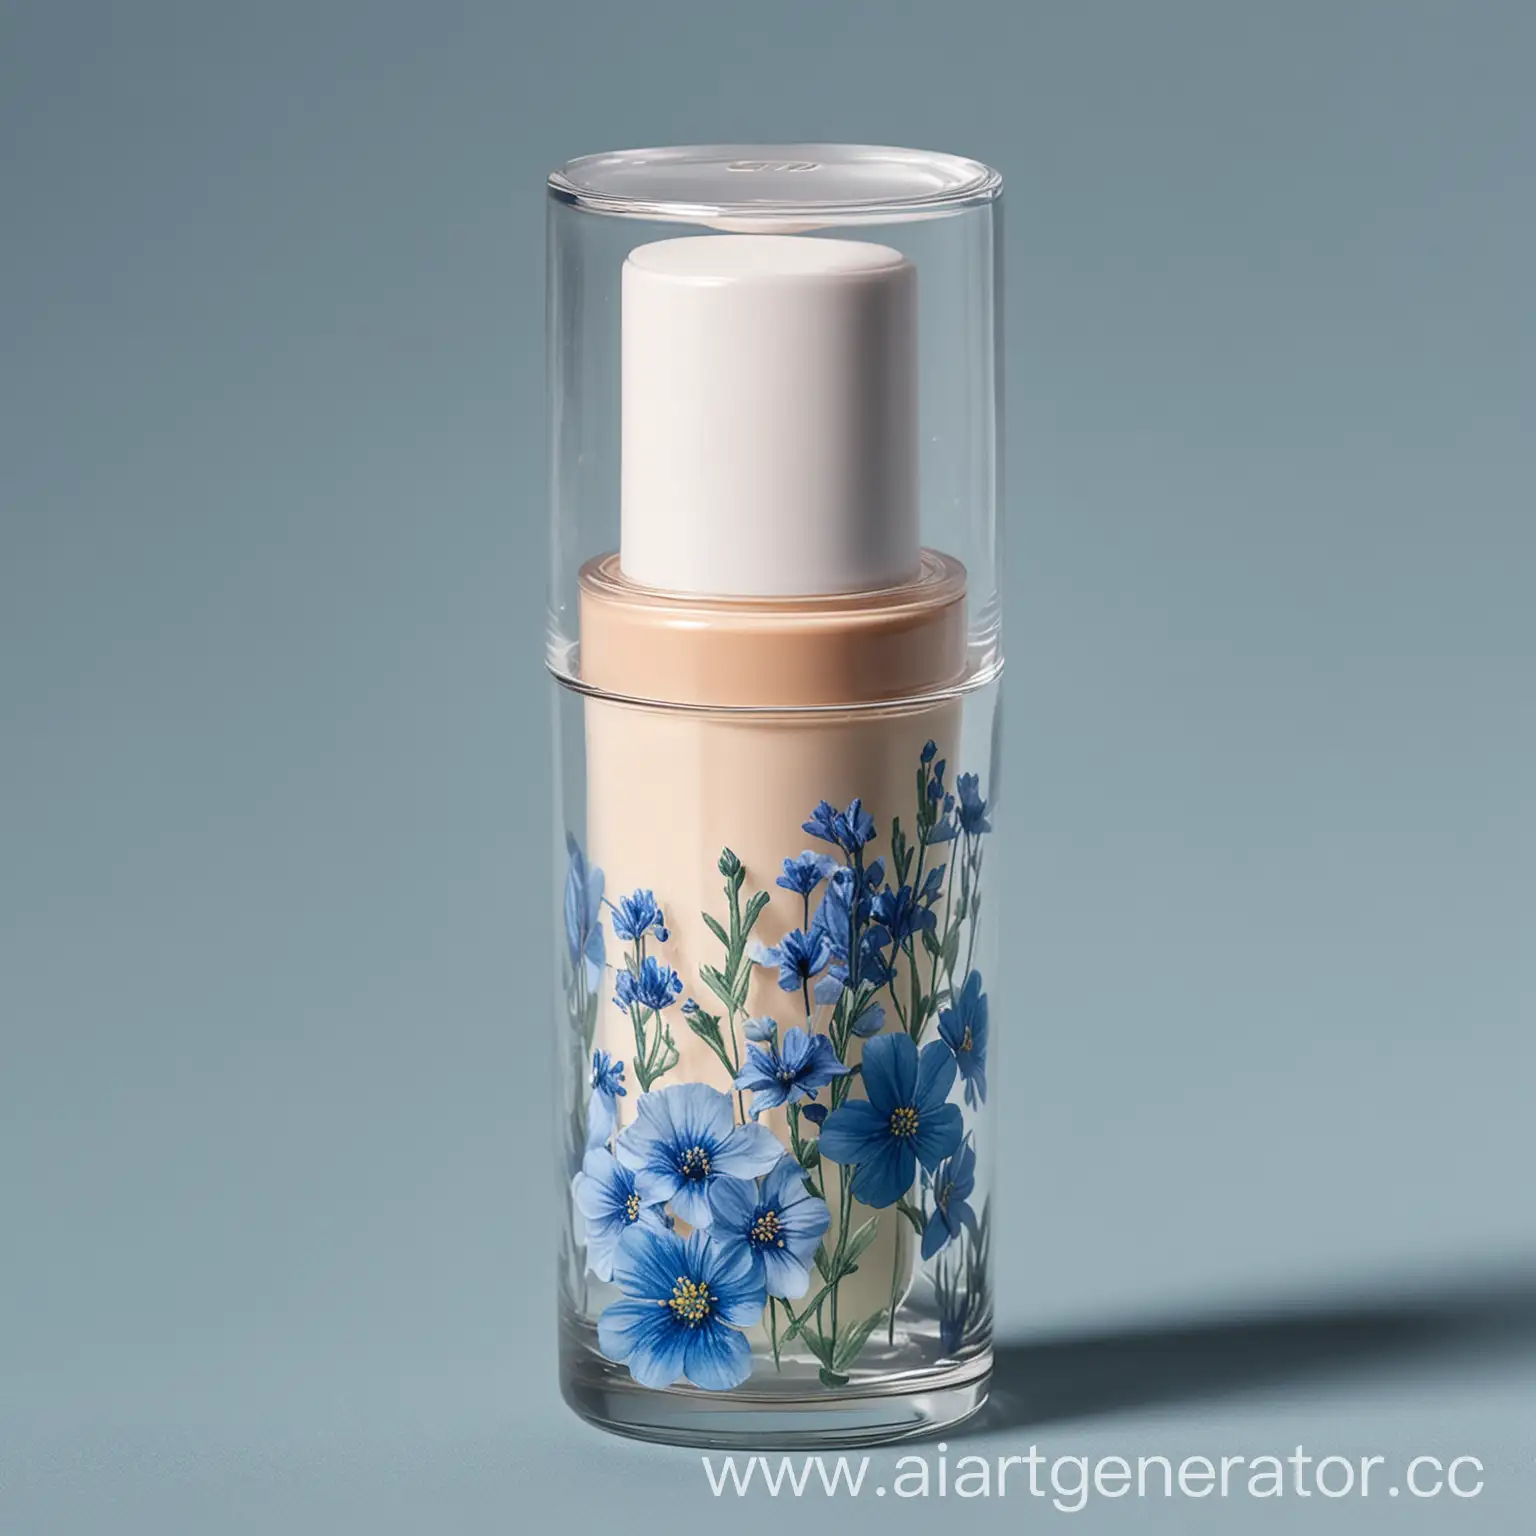 cosmetic concealer of a light shade in a transparent cylindrical glass package with blue and blue flowers inside the package with a white lid